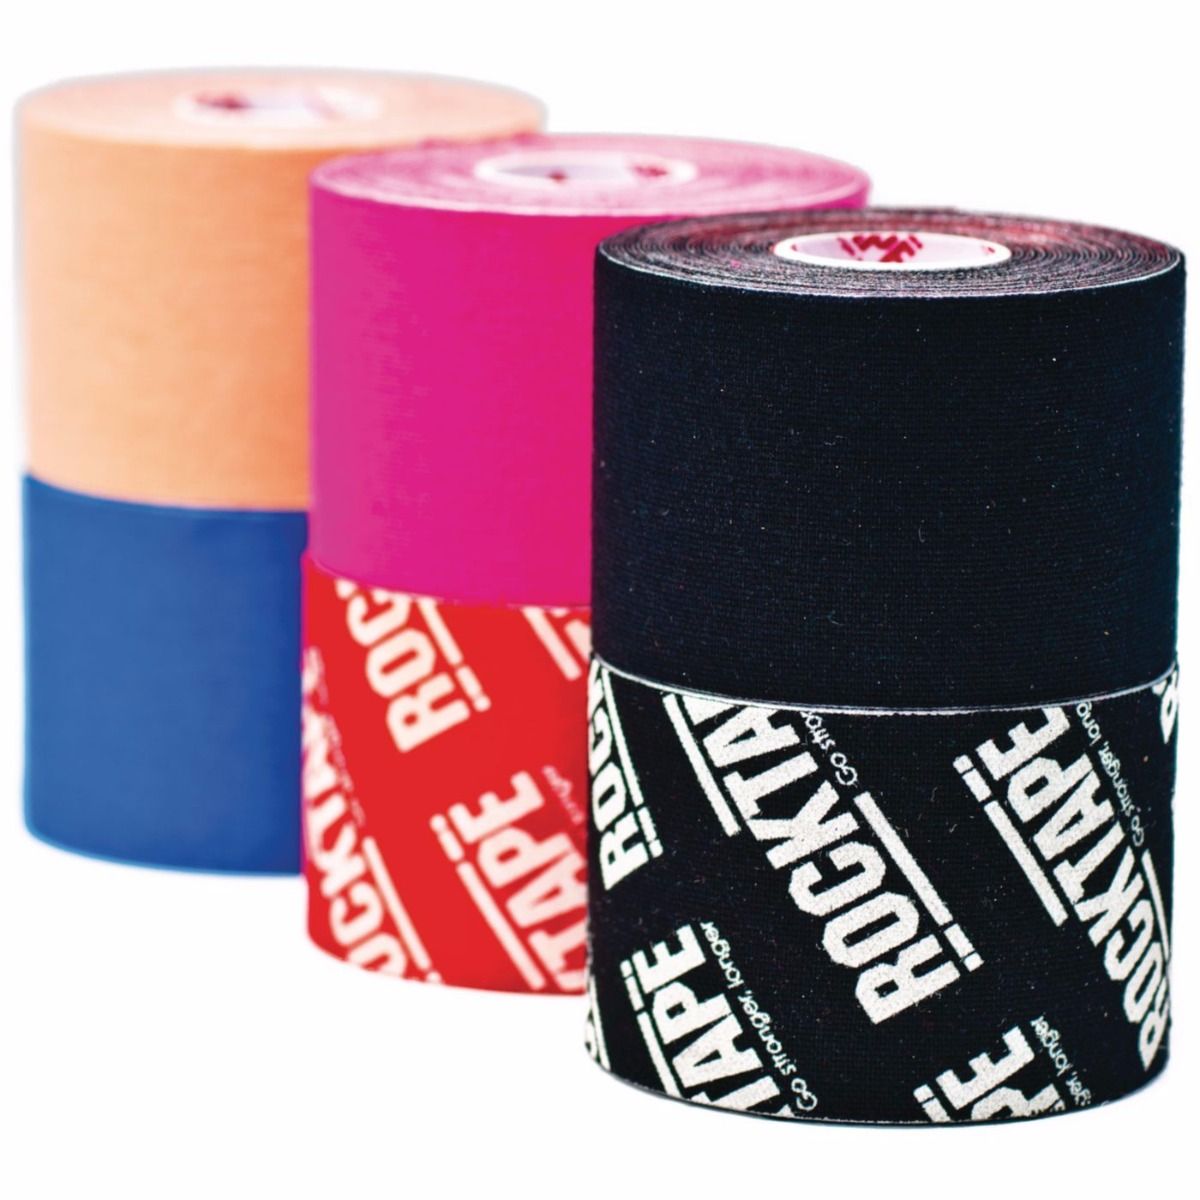 RockTape - Kinesiology Tape in different colors and prints from Performance Hea